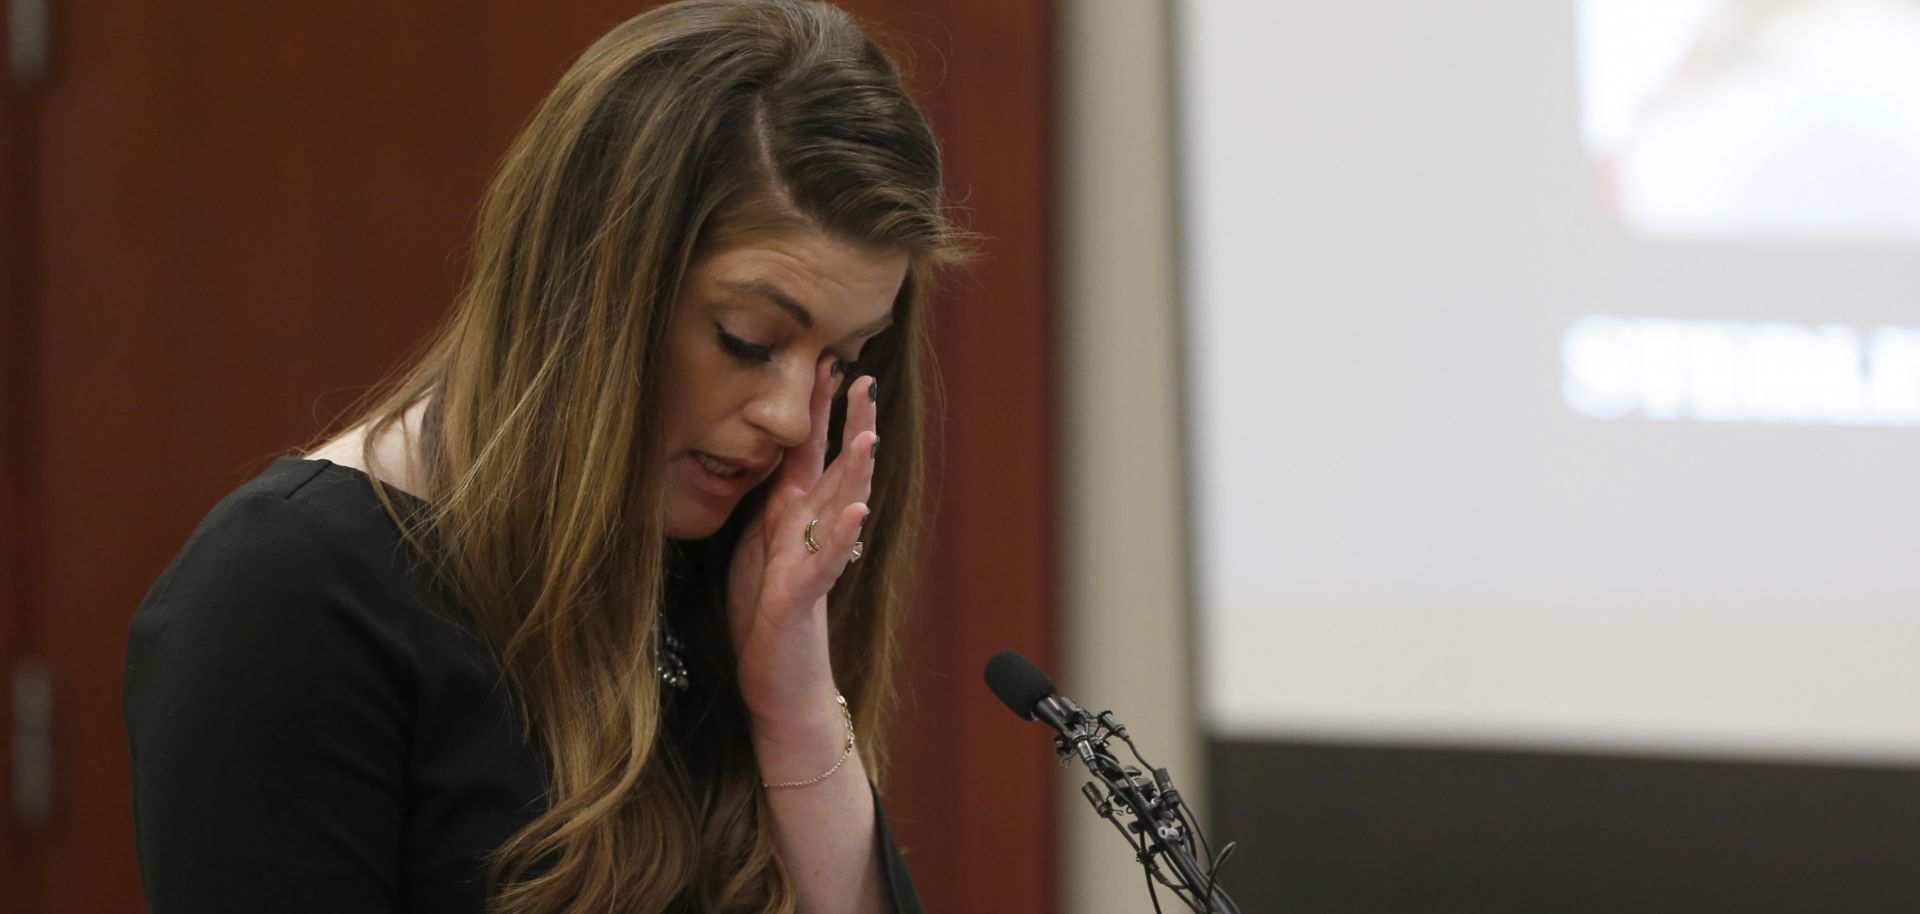 Sterling Riethman, a former patient of USA Gymnastics physician Larry Nassar, testifies about the extent of his abuse of her under the guise of medical treatment.